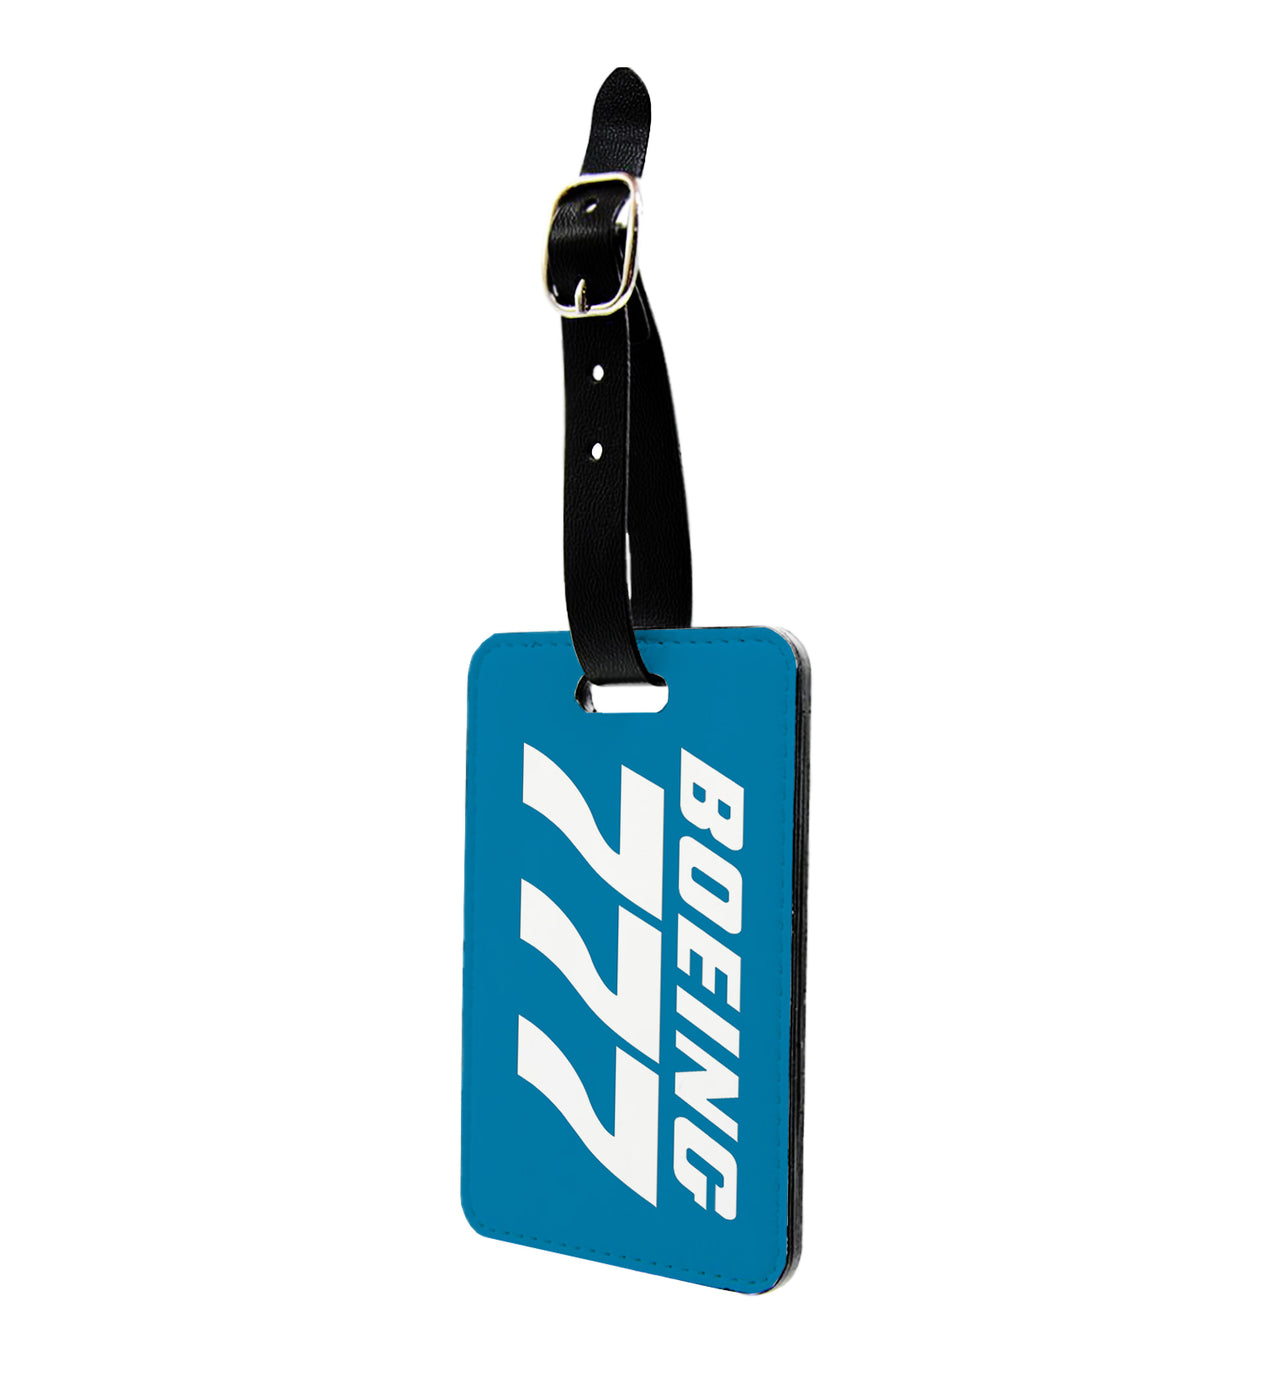 Boeing 777 & Text Designed Luggage Tag